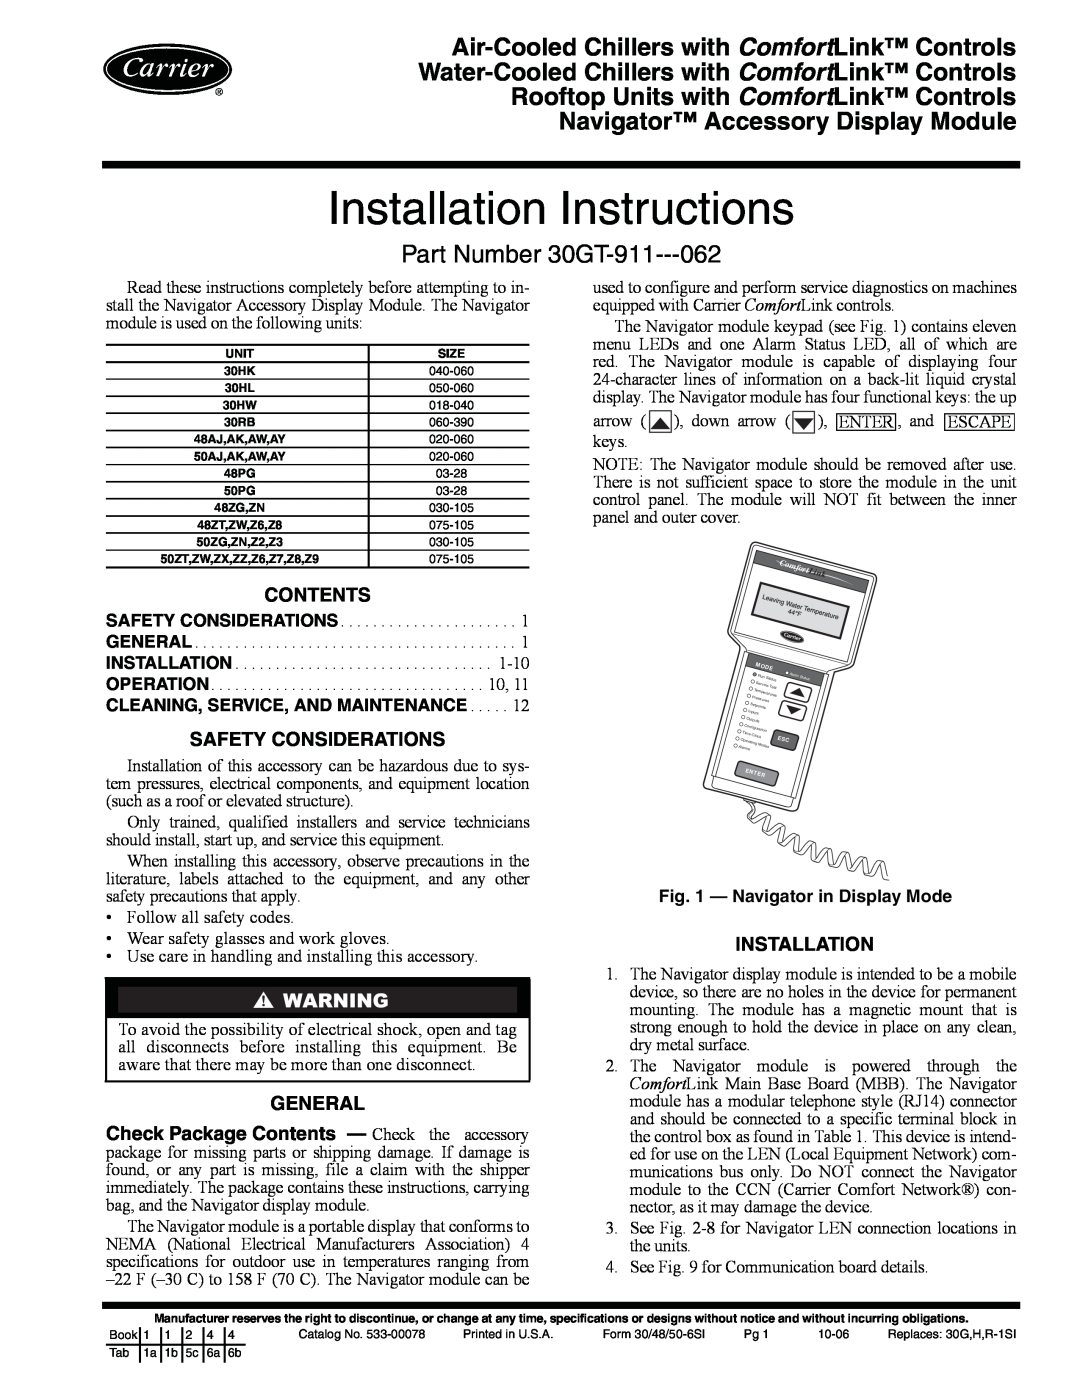 Carrier 30GT-911---062 installation instructions Contents, Safety Considerations, General, Installation 